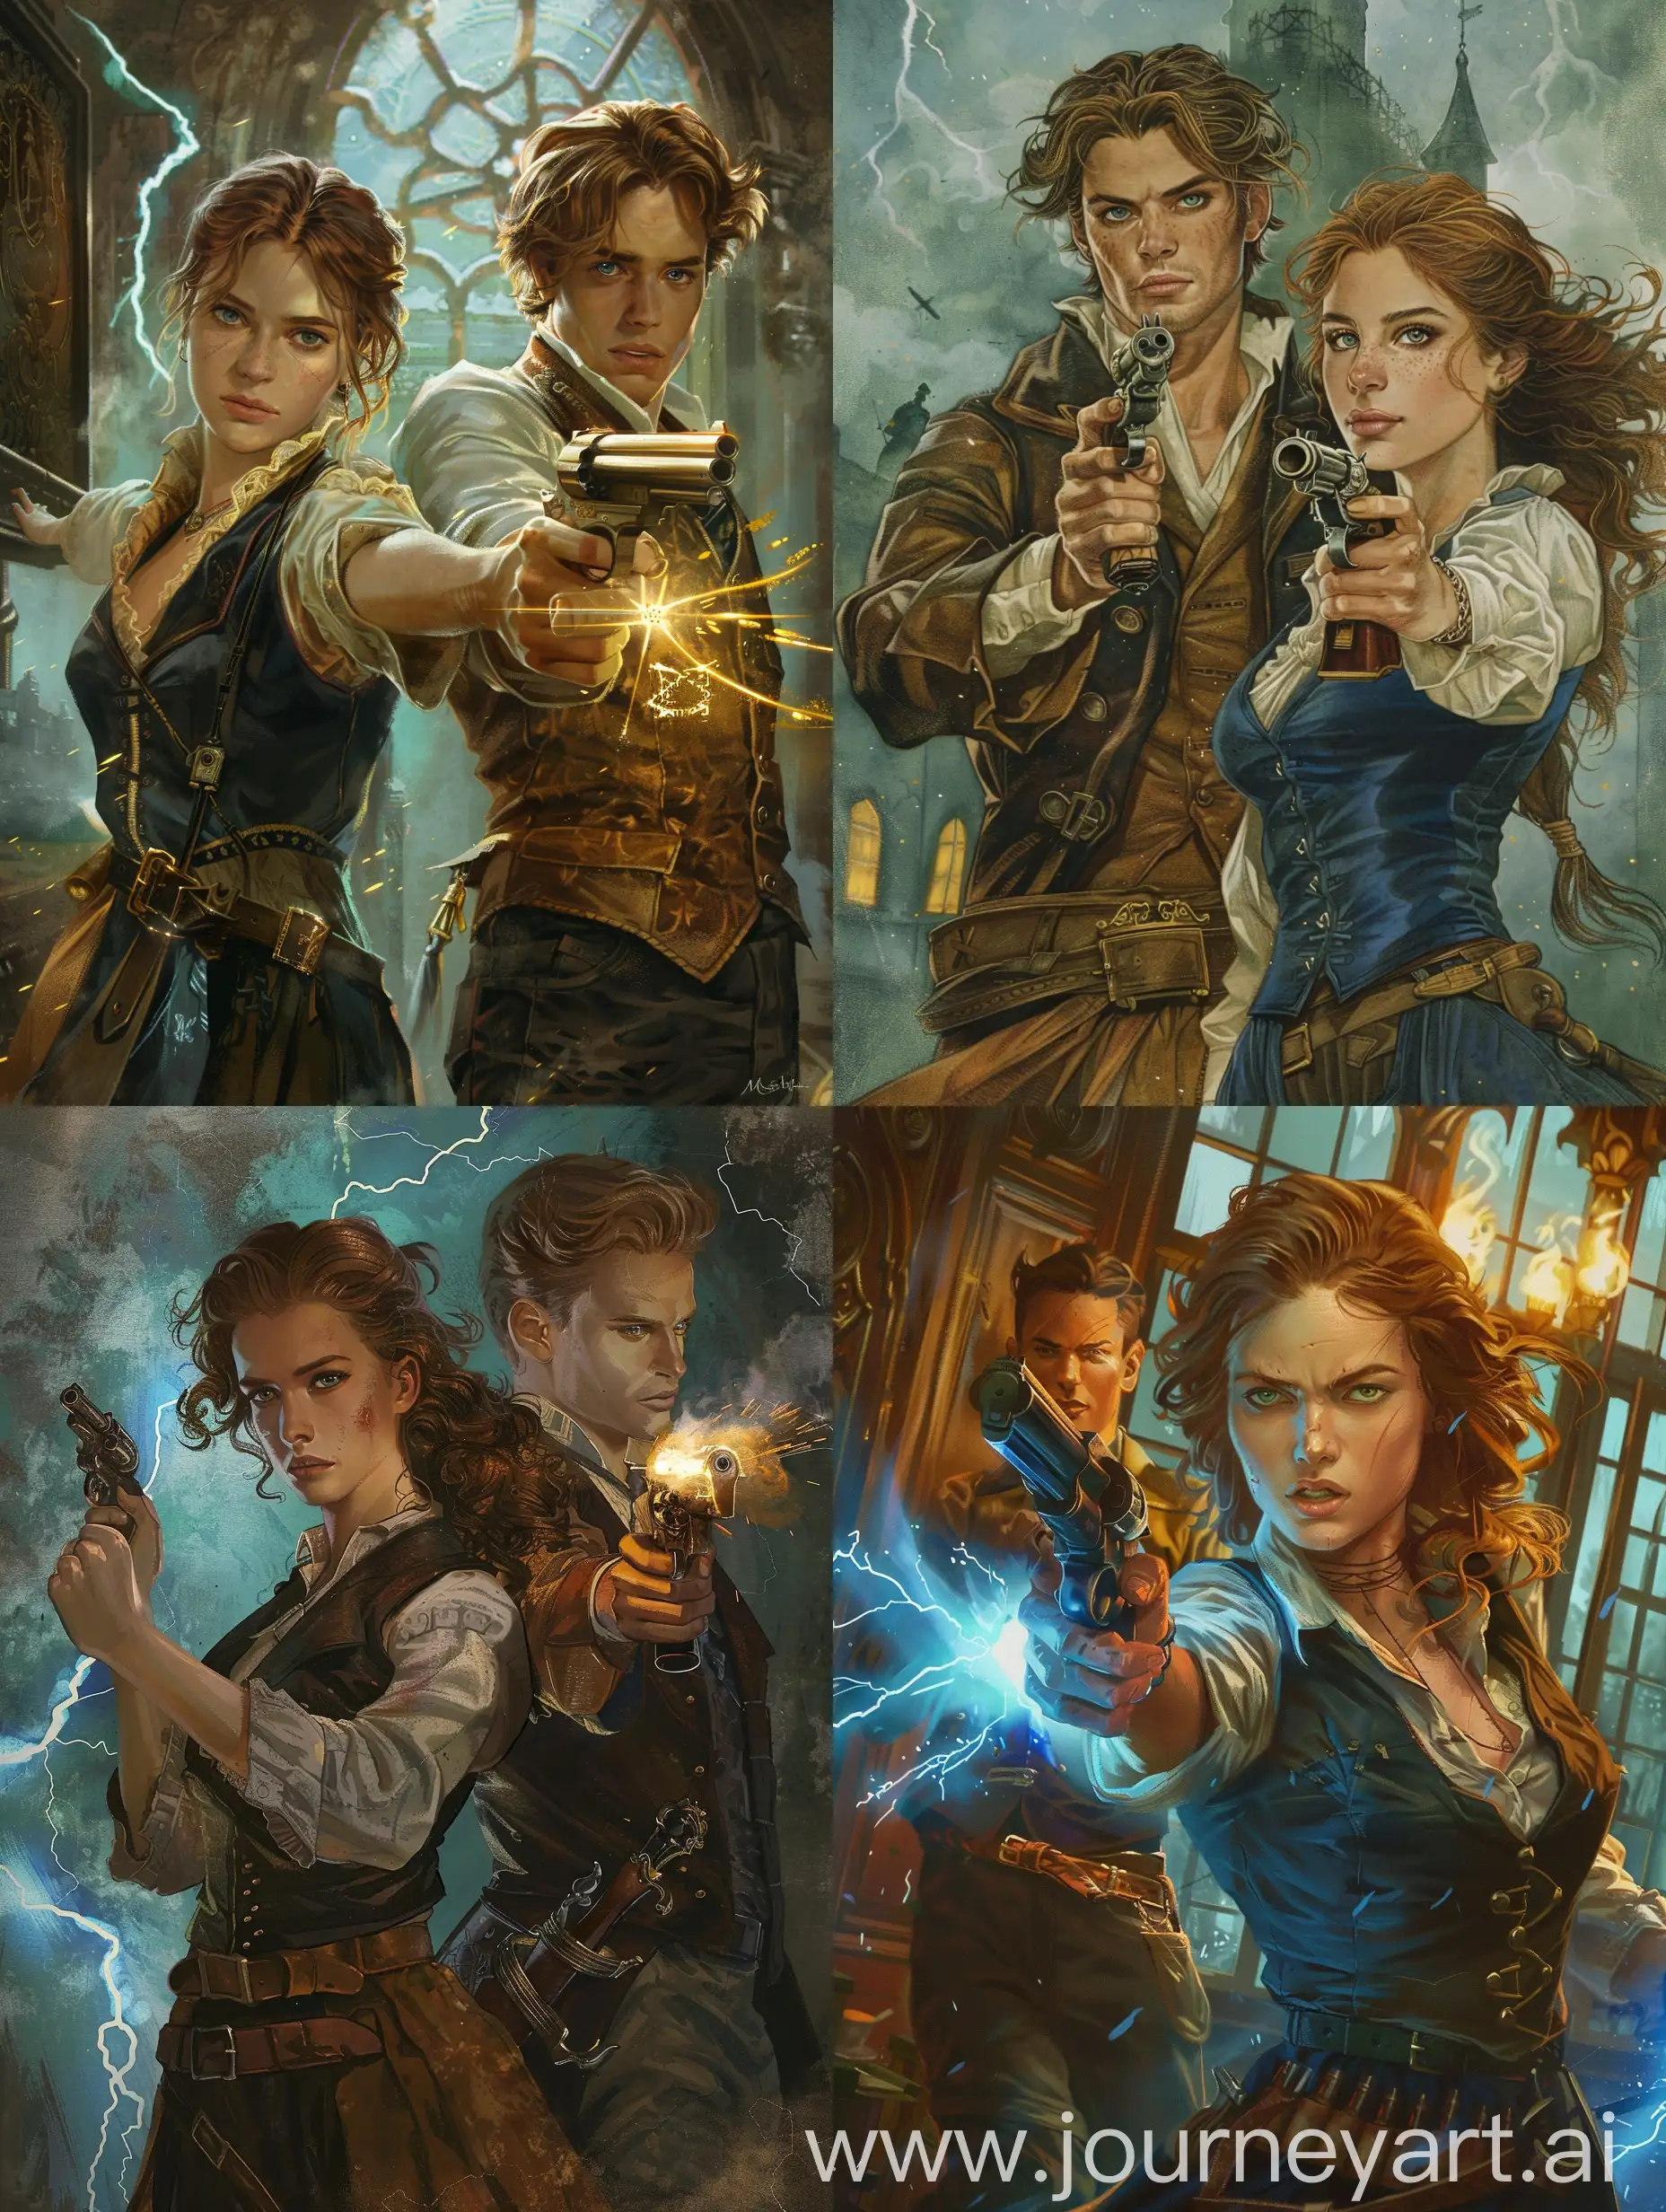 Extremely detailed illustration Two people: A brown-haired girl pointed a gun at a golden-haired guy. Electricity and lightning are all around them. The girl looks like this: 20 years old, beautiful, brown hair, light blue eyes, chiseled cheekbones, dressed in medieval clothes (pants and shirt), looks serious, points a gun at the guy. The guy looks like this: 25 years old, handsome, golden curly hair, golden eyes, high cheekbones, dressed in expensive medieval clothes, smiling, standing calmly and without weapons.   A girl with a gun and pointed it at a golden-haired guy. The guy is standing in front of the girl, they look at each other, and the girl shoots at him with a pistol. The atmosphere of the Middle Ages and magic. There are thunderclouds in the background.  The atmosphere of the Middle Ages and magic. Best resolution, best quality, hyperdetailed, sharp focus, esketch book, bits of color, slightly coloured, rough sketch, art nouveau, ink lines, ink art by MSchiffer